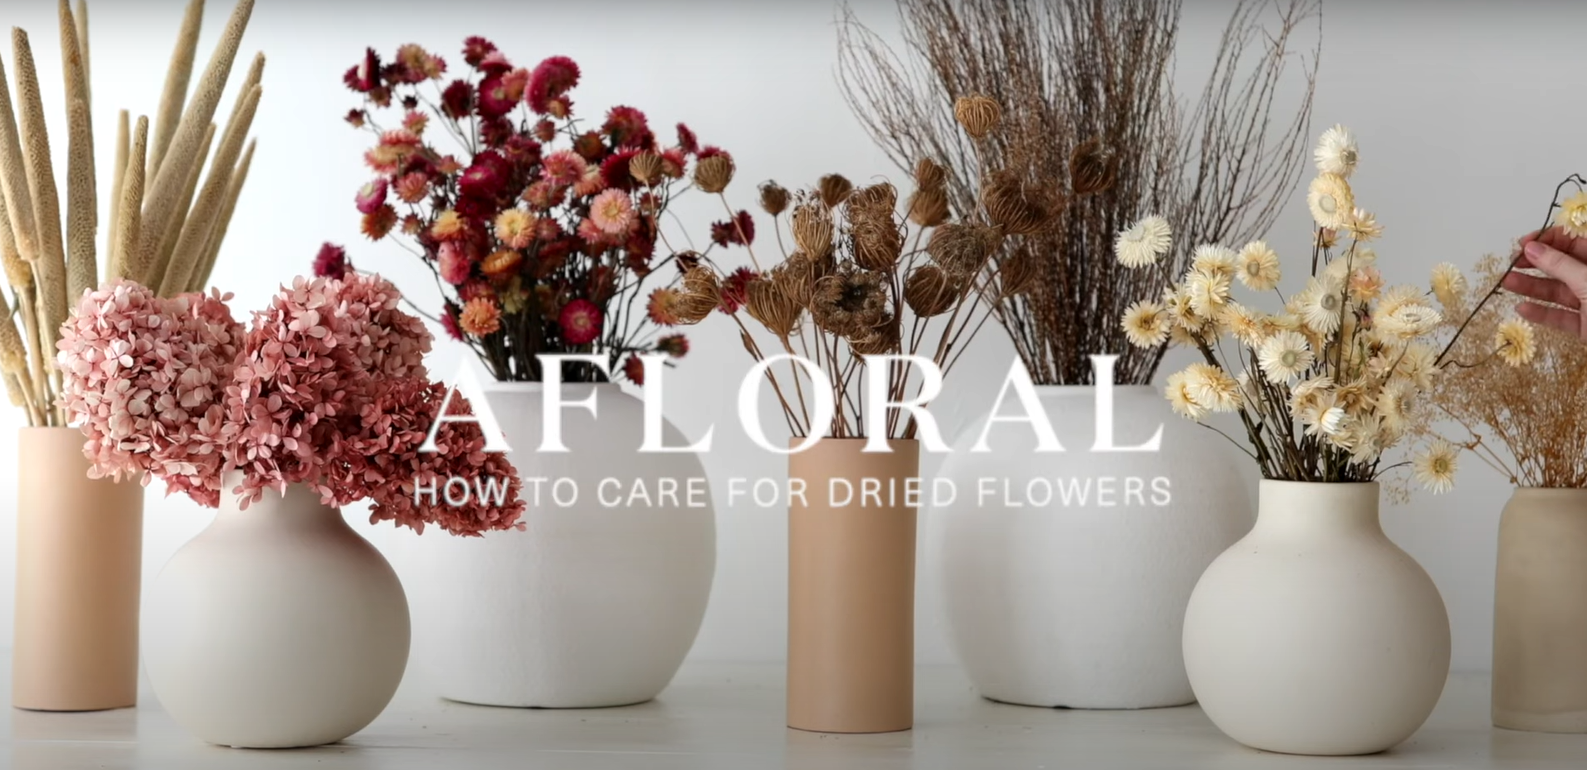 Load video: Watch how to care for dried plants and flowers. | Afloral